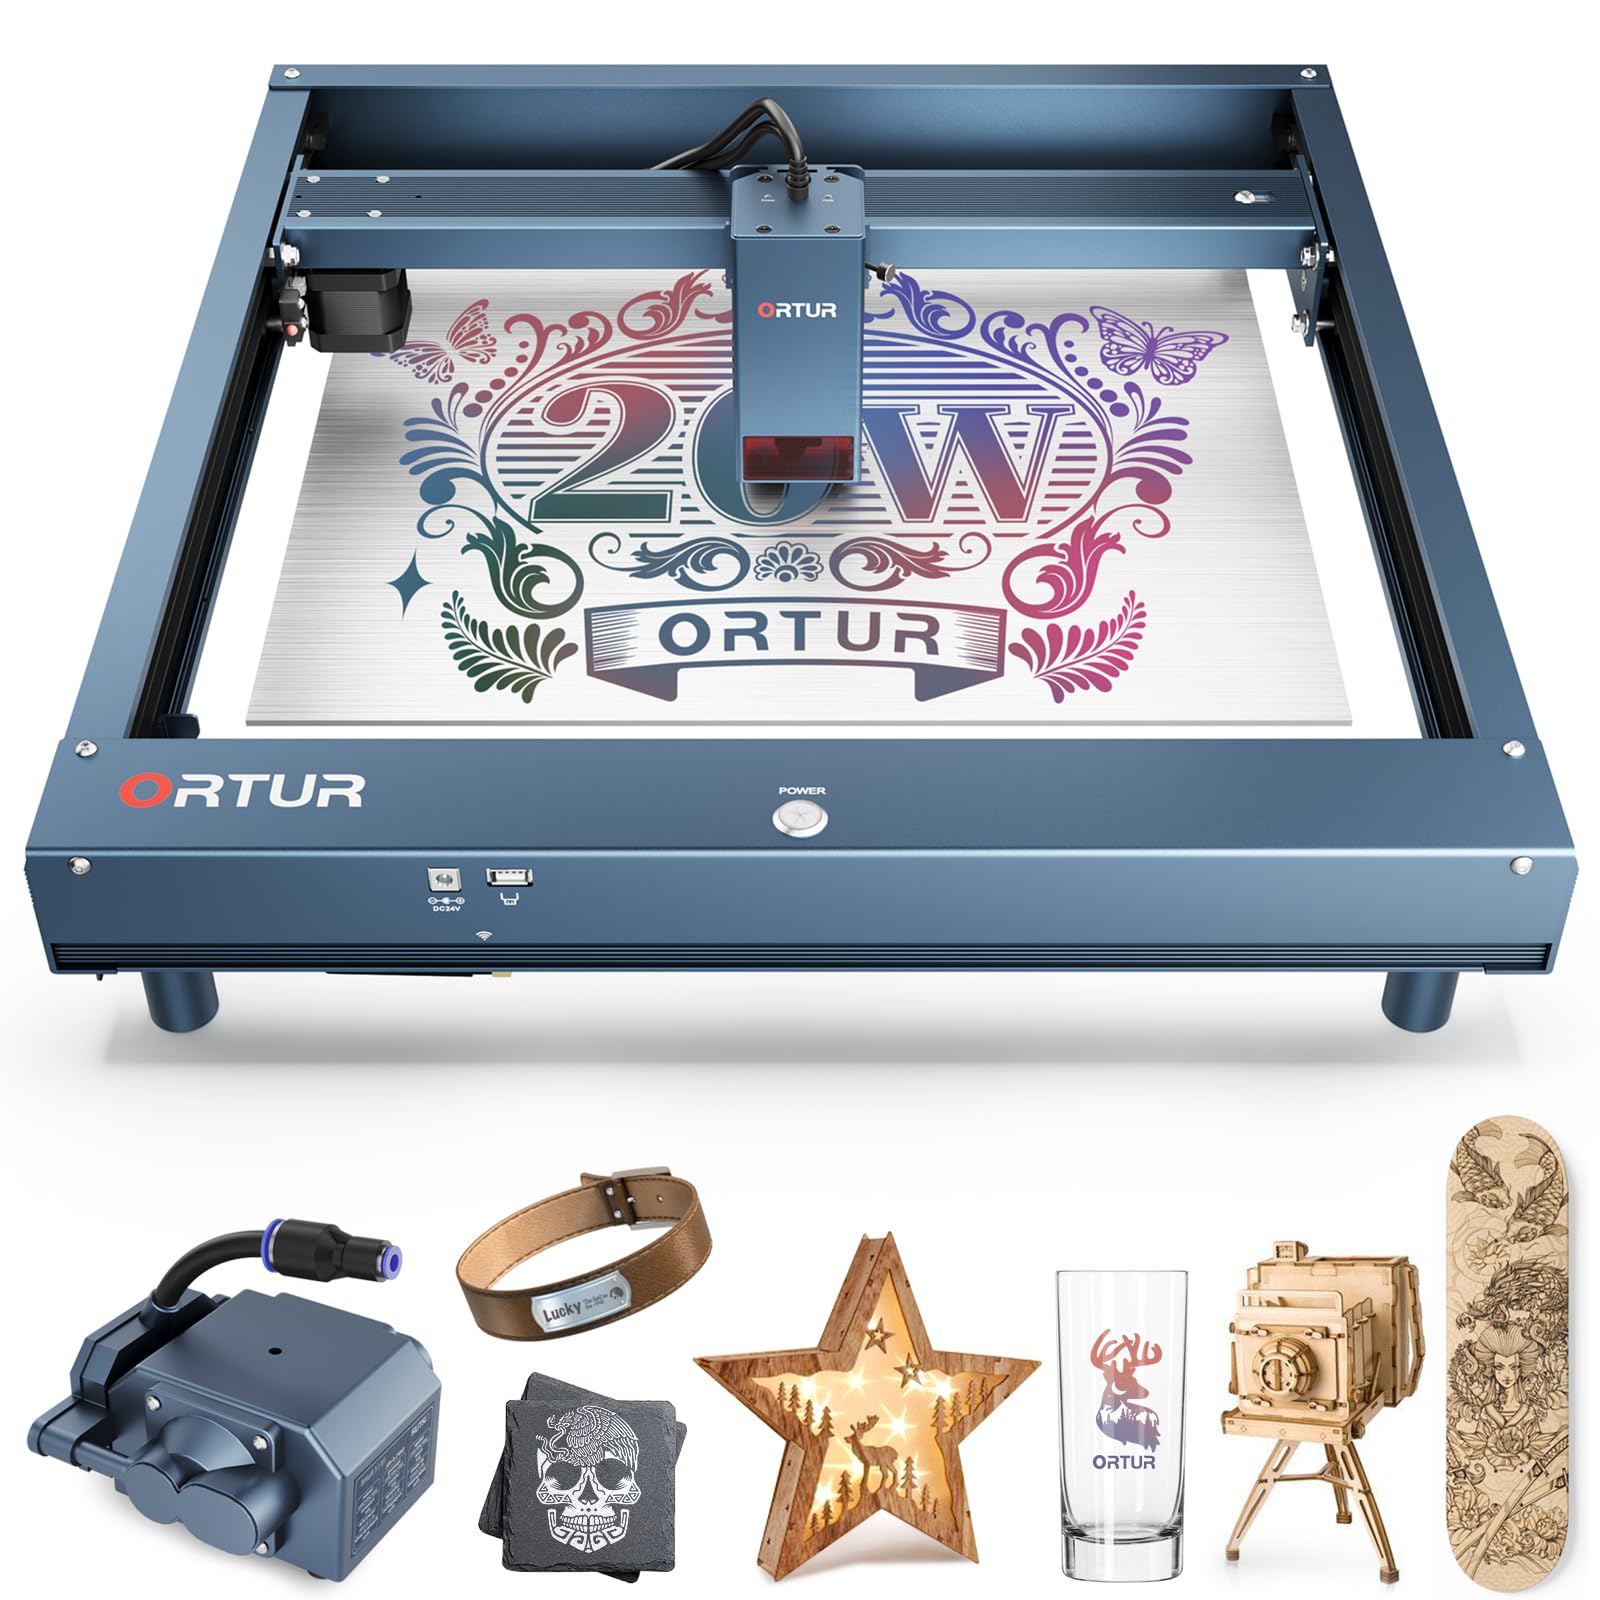 Ortur Laser Master H10, 20W Laser Engraver with 40L Laser Air Assist, 20W Laser Cutter and Engraver Machine, 20000mm/min Engraving Speed and App Control Laser Engraver for Wood and Metal, Acrylic